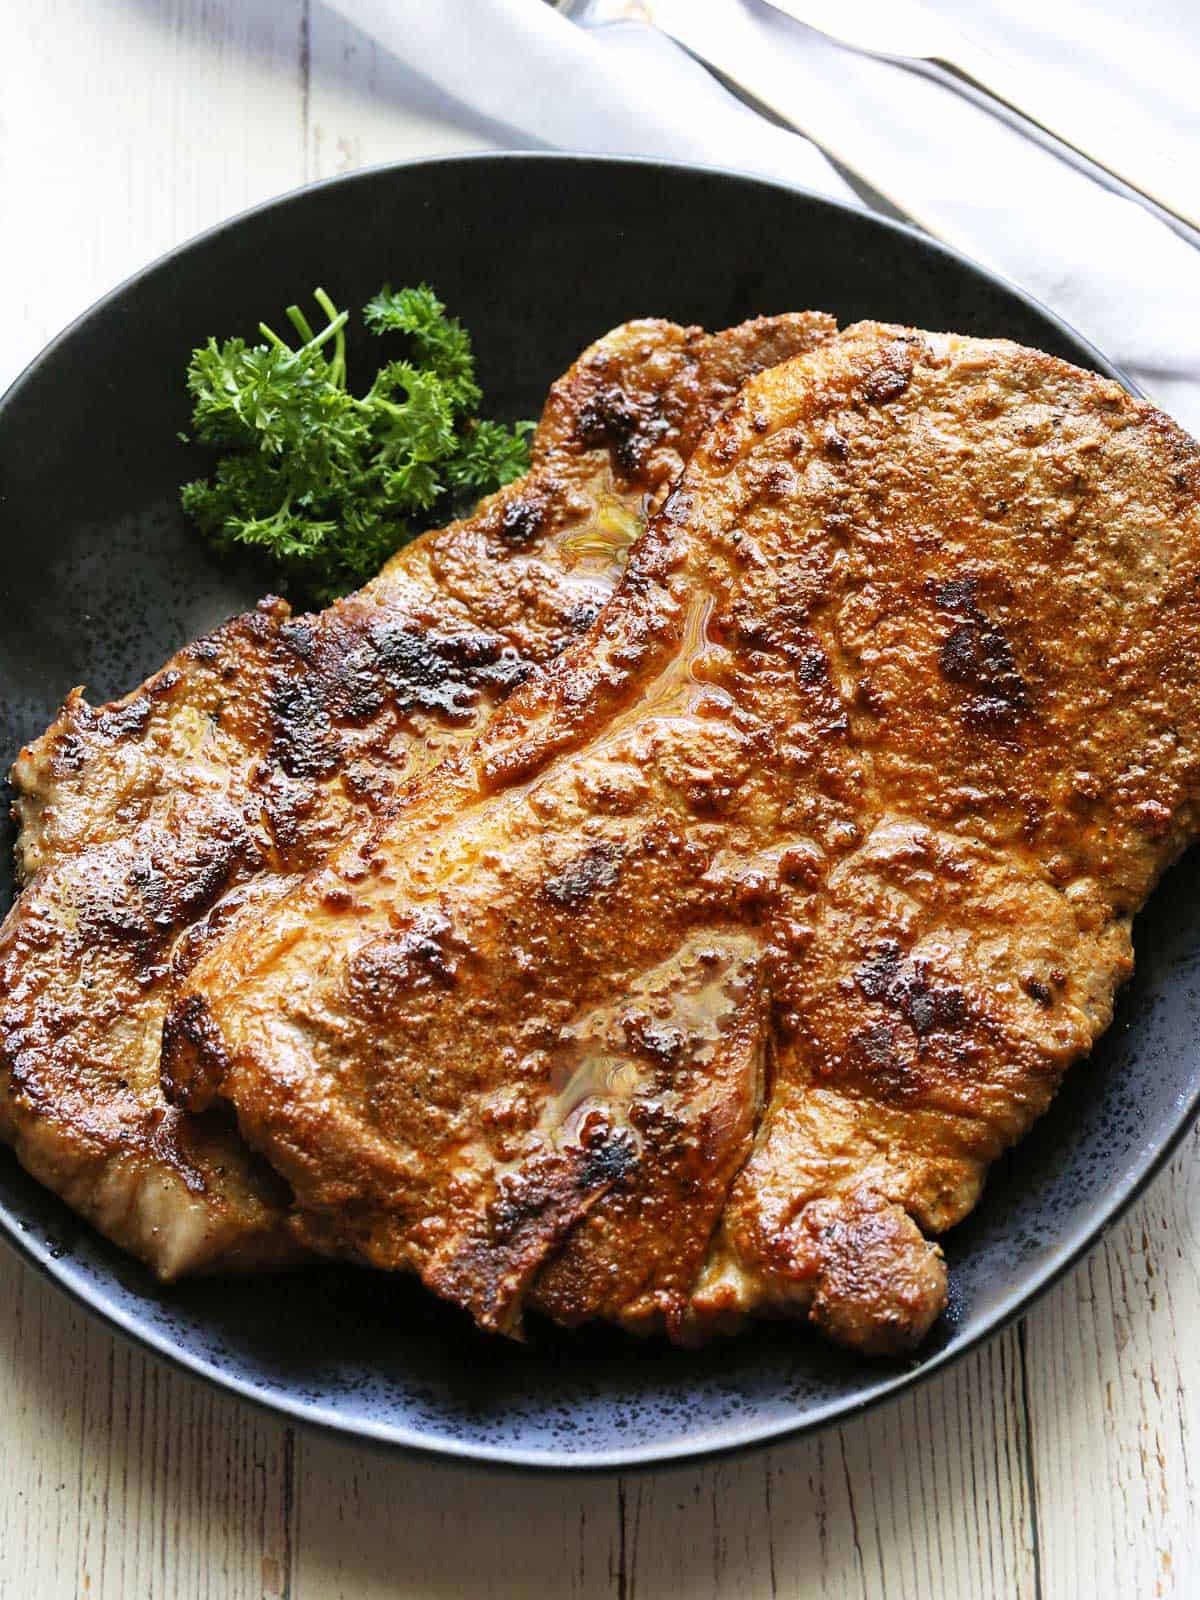 Two pork shoulder steaks are served with a garnish of parsley.